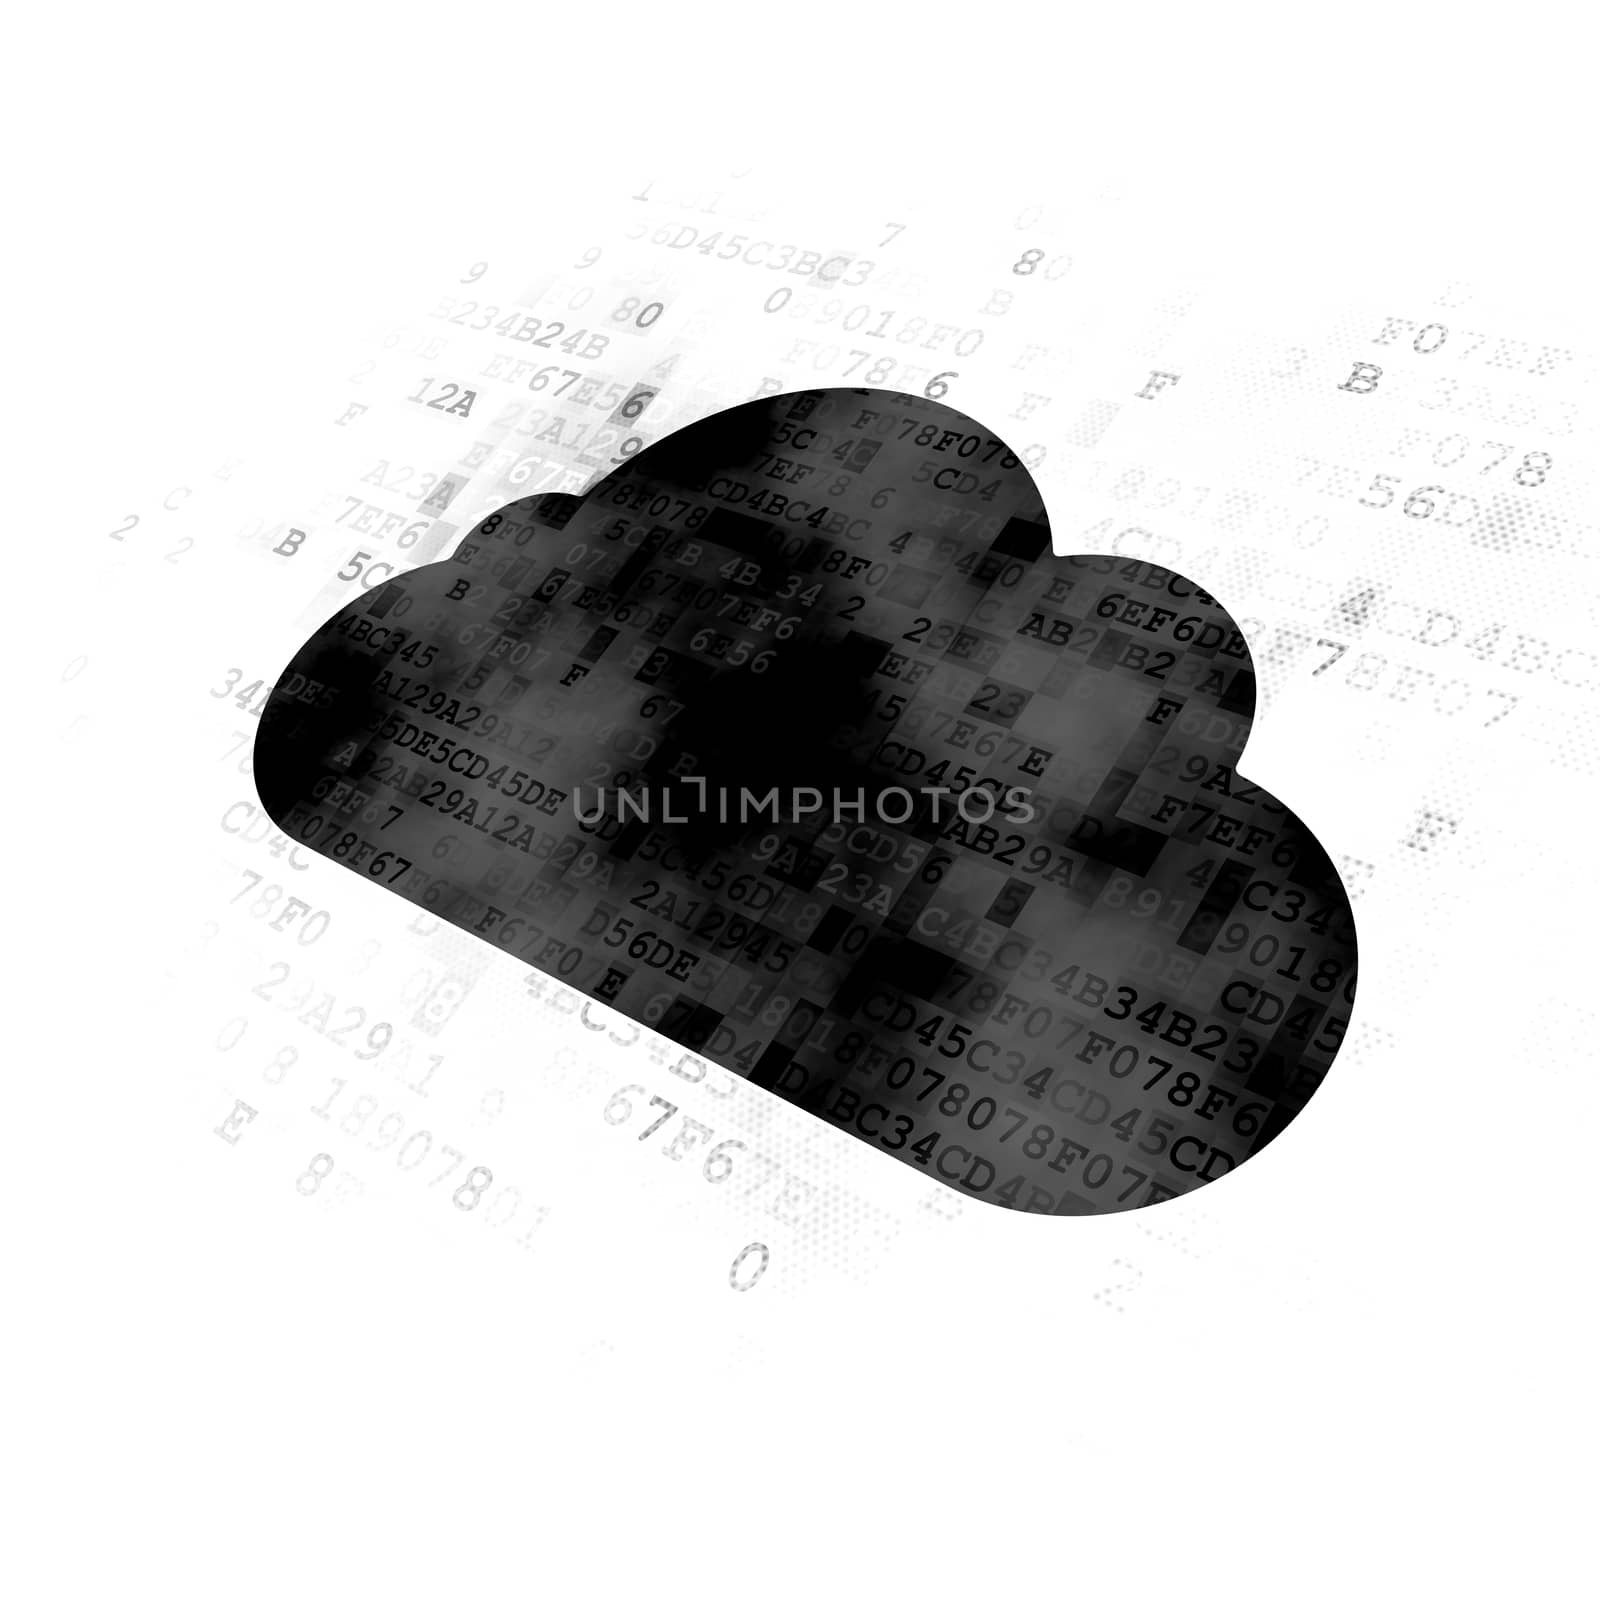 Cloud networking concept: Pixelated black Cloud icon on Digital background